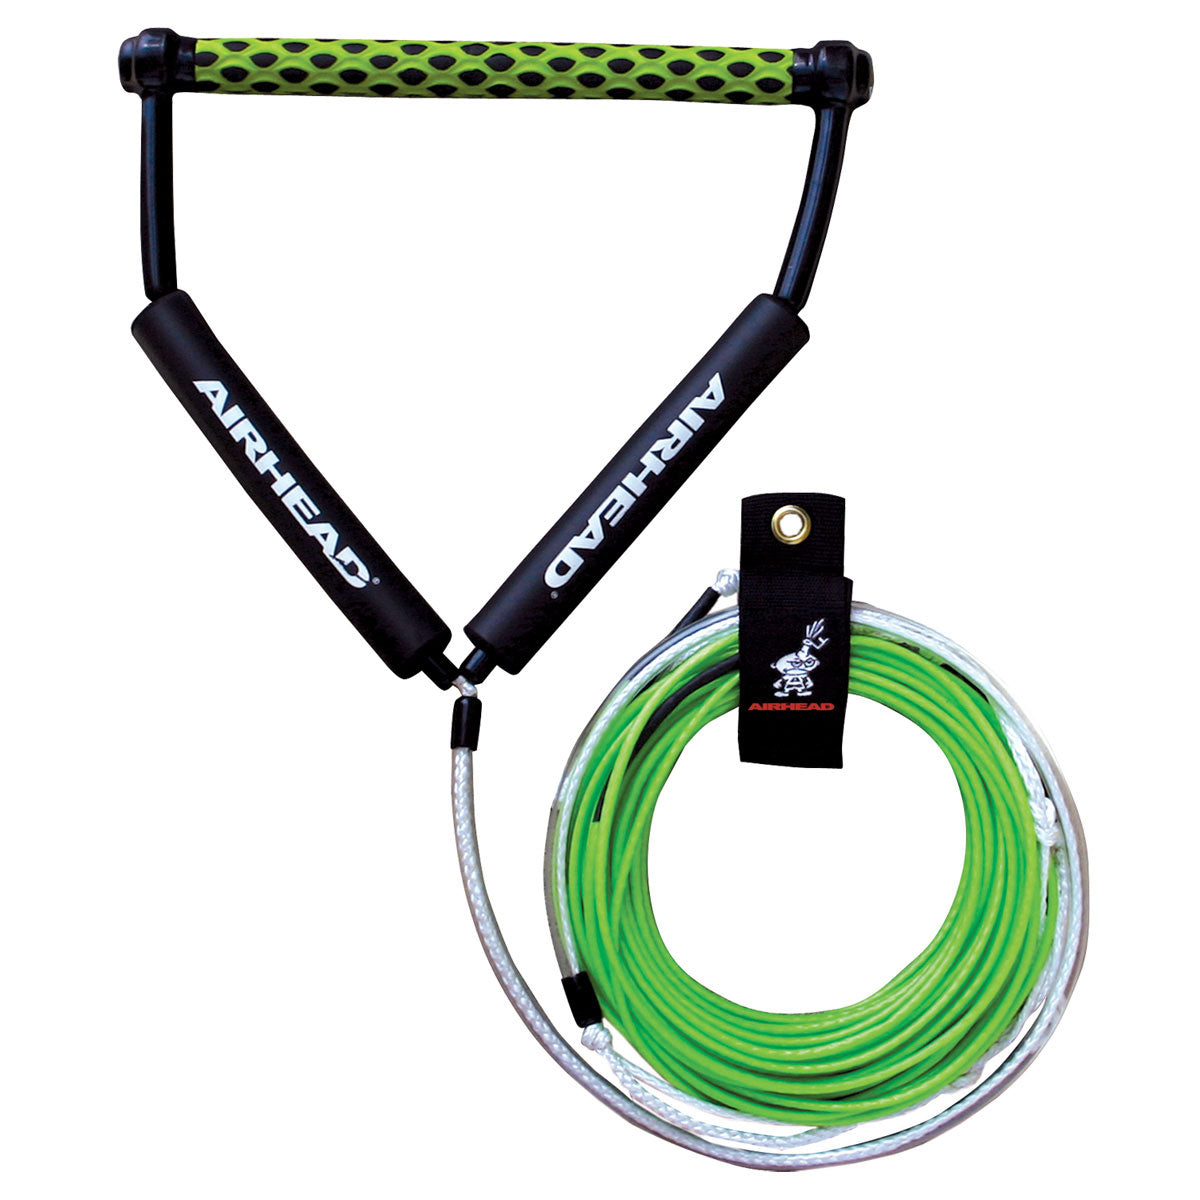 Airhead Spectra Thermal Wake board Rope